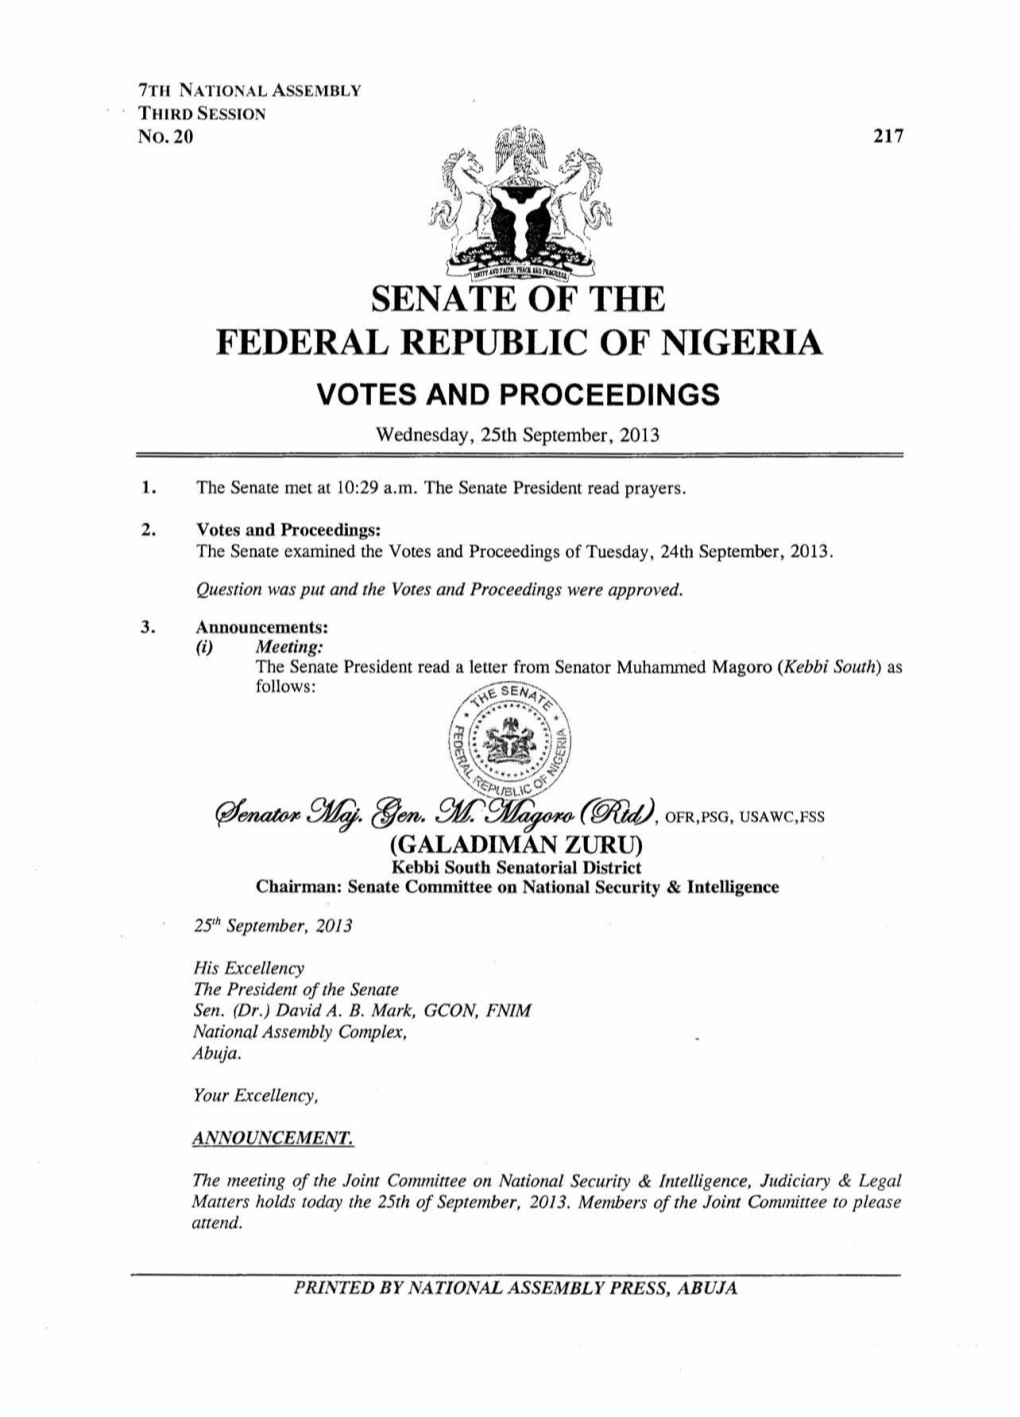 SENATE of the FEDERAL REPUBLIC of NIGERIA VOTES and PROCEEDINGS Wednesday, 25Th September, 2013